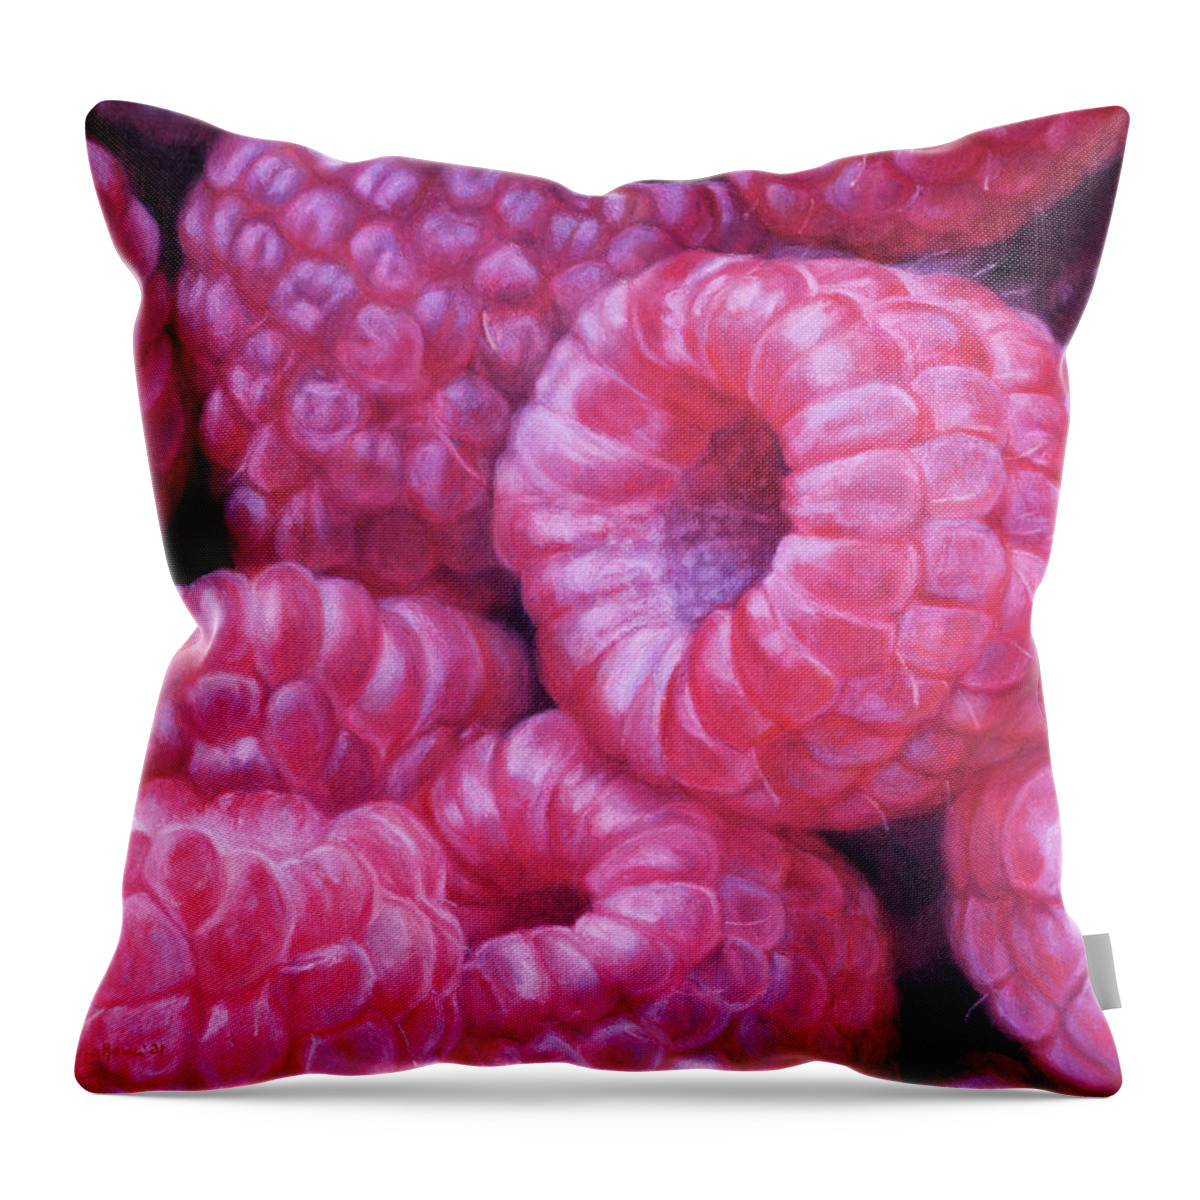 Raspberry Throw Pillow featuring the drawing I'm Jazzed about Raspberries by Shana Rowe Jackson